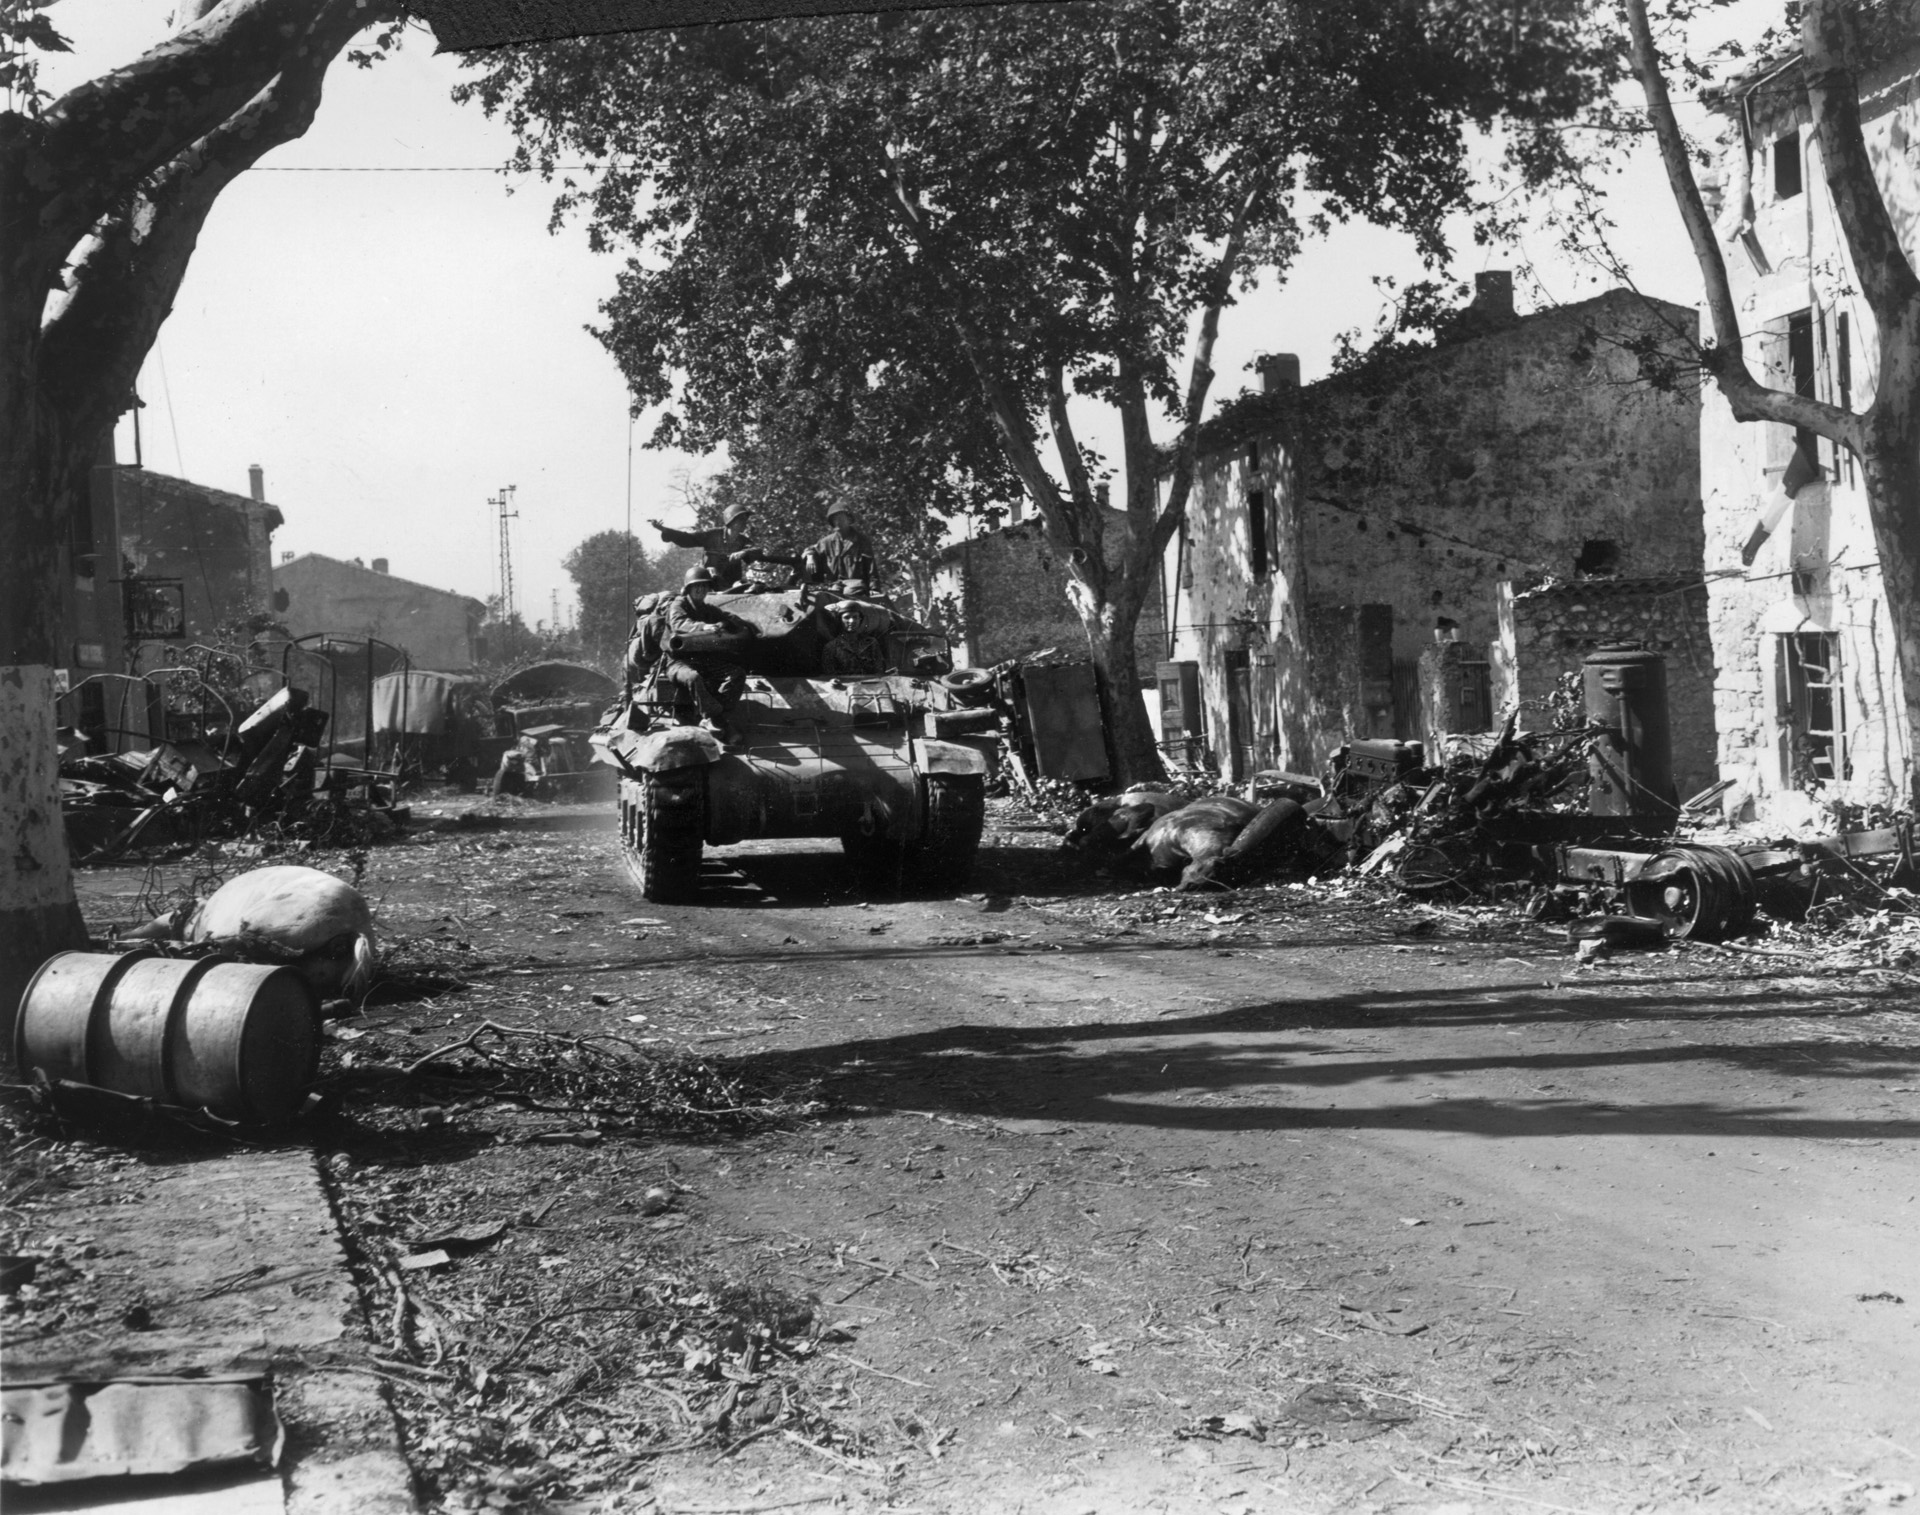 The wreckage of a German convoy, decimated by Allied air power north of Montelimar during Operation Anvil-Dragoon, litters both sides of the road as an American tank lumbers past. German forces in southern France continued their retreat after mounting a spirited defense in some areas.